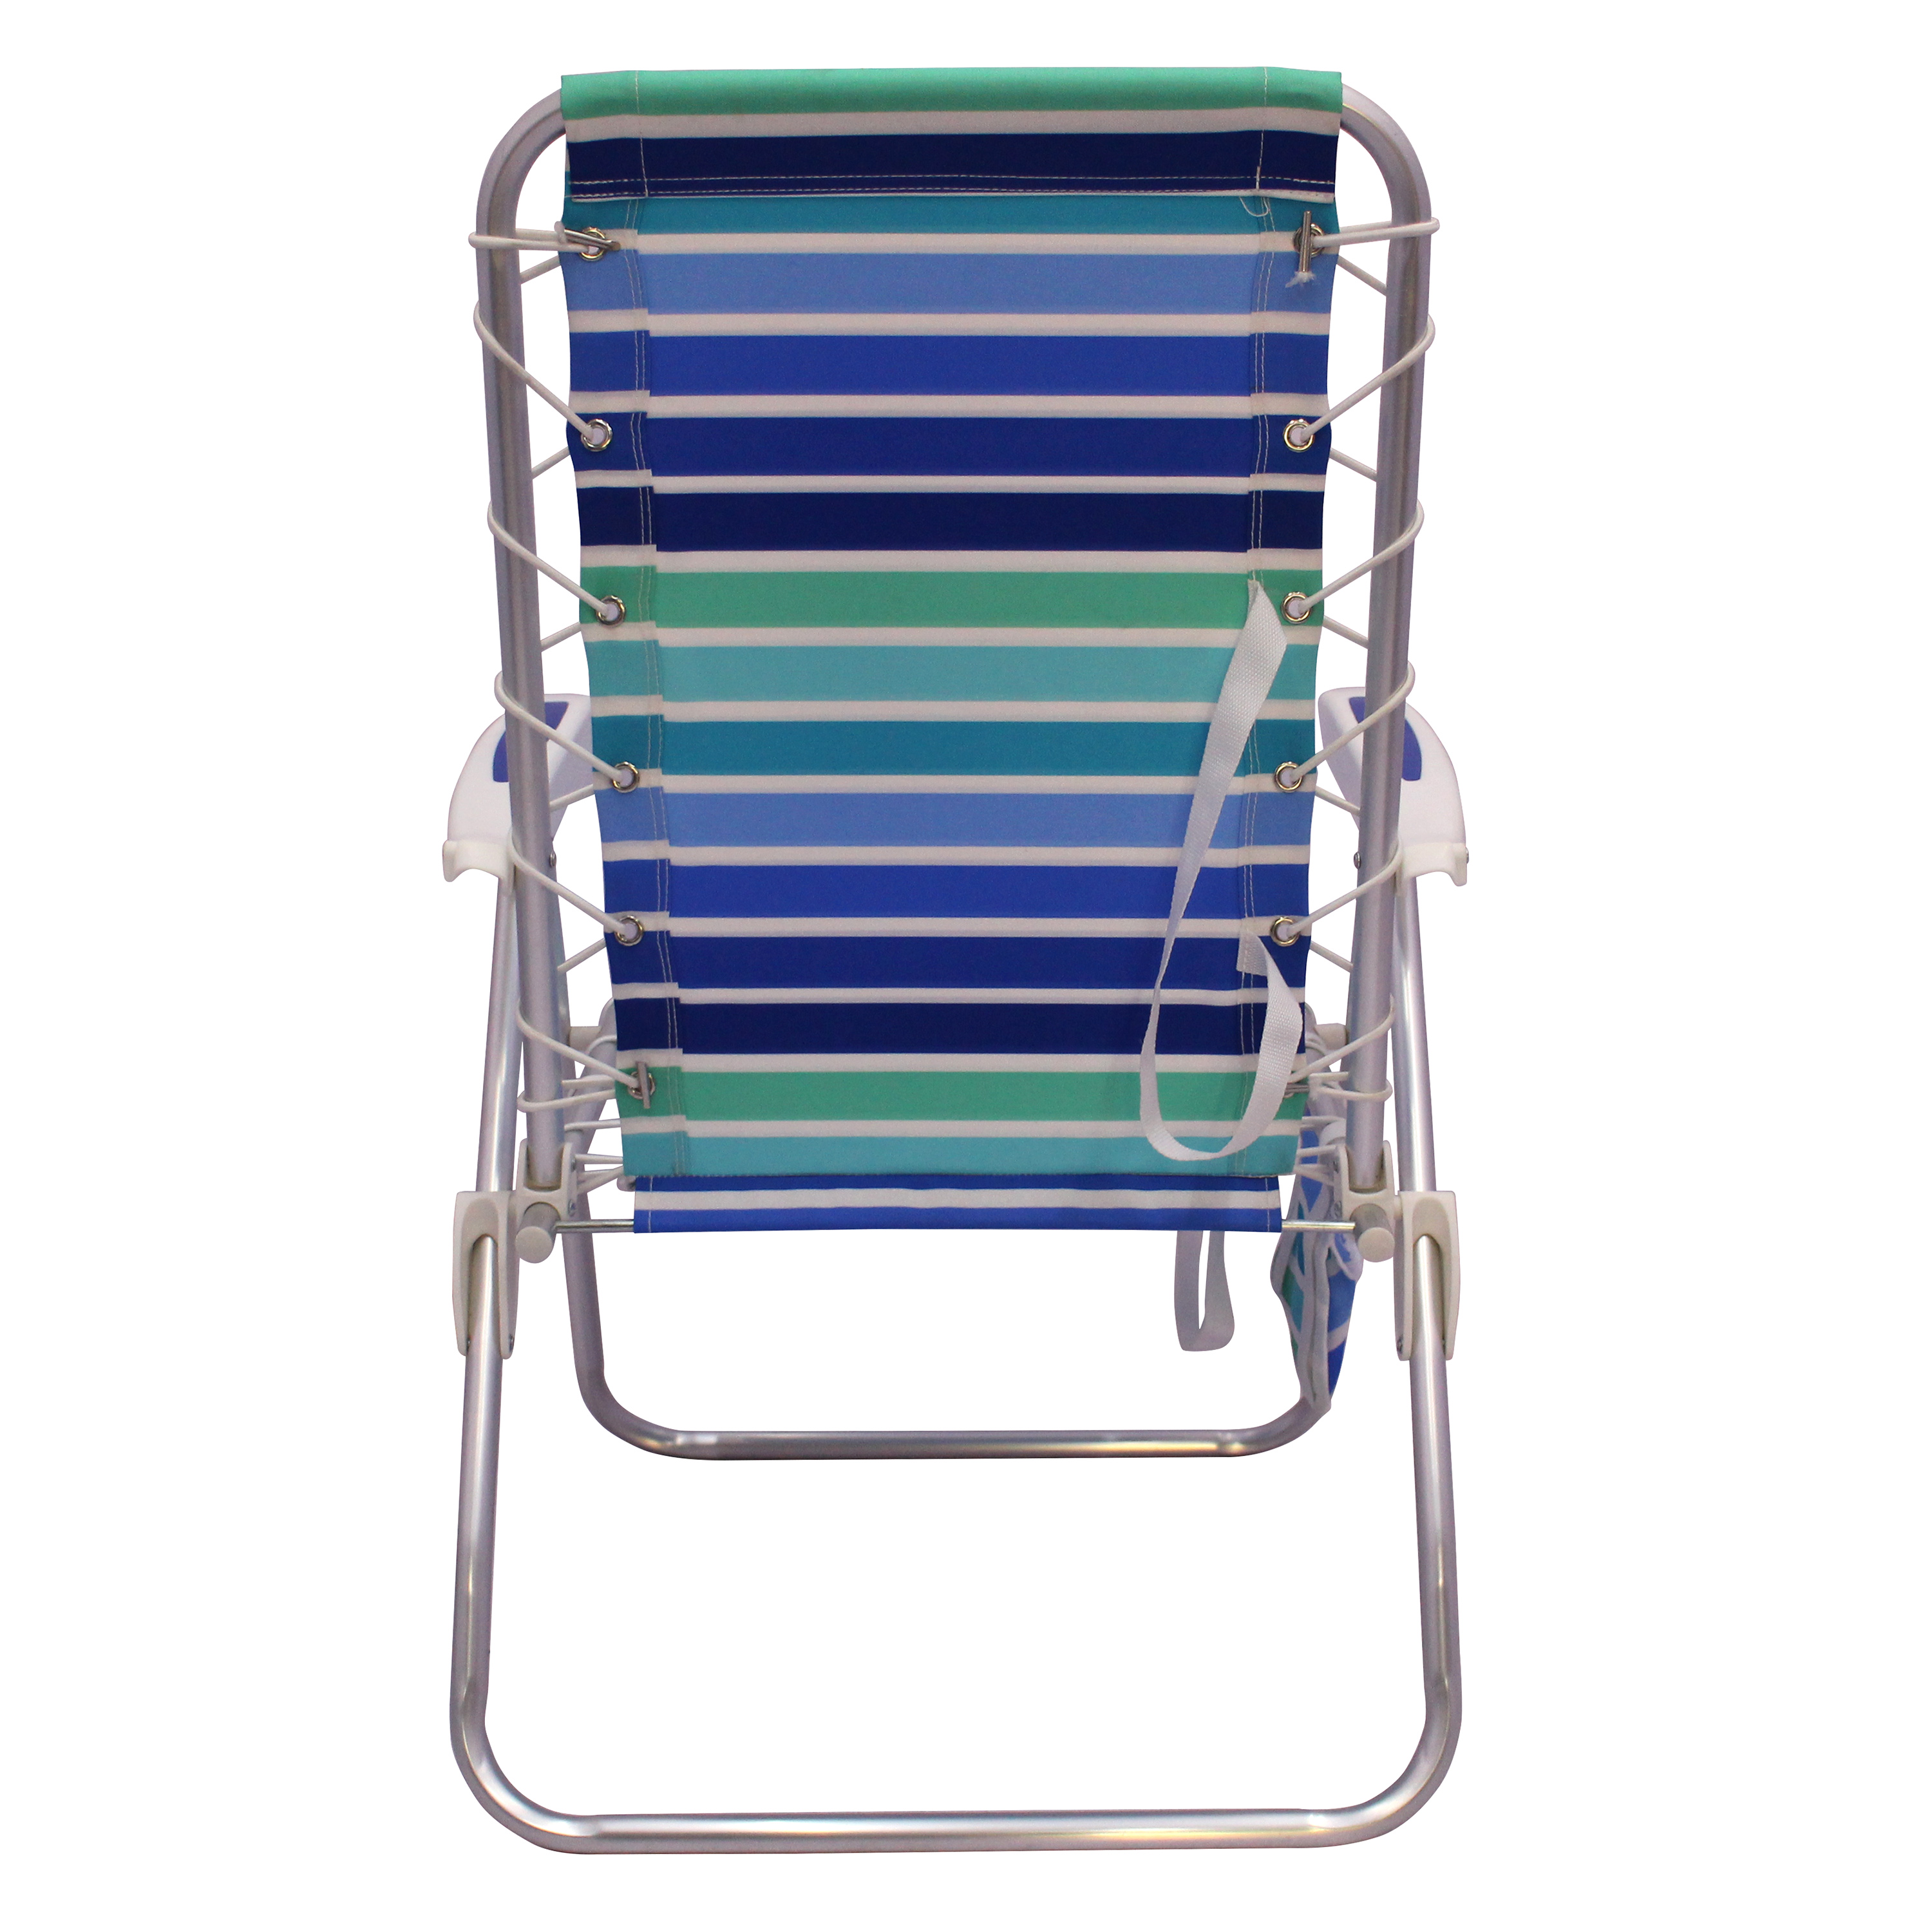 Mainstays Reclining Bungee Beach Chair Blue & Green Stripe - image 3 of 8